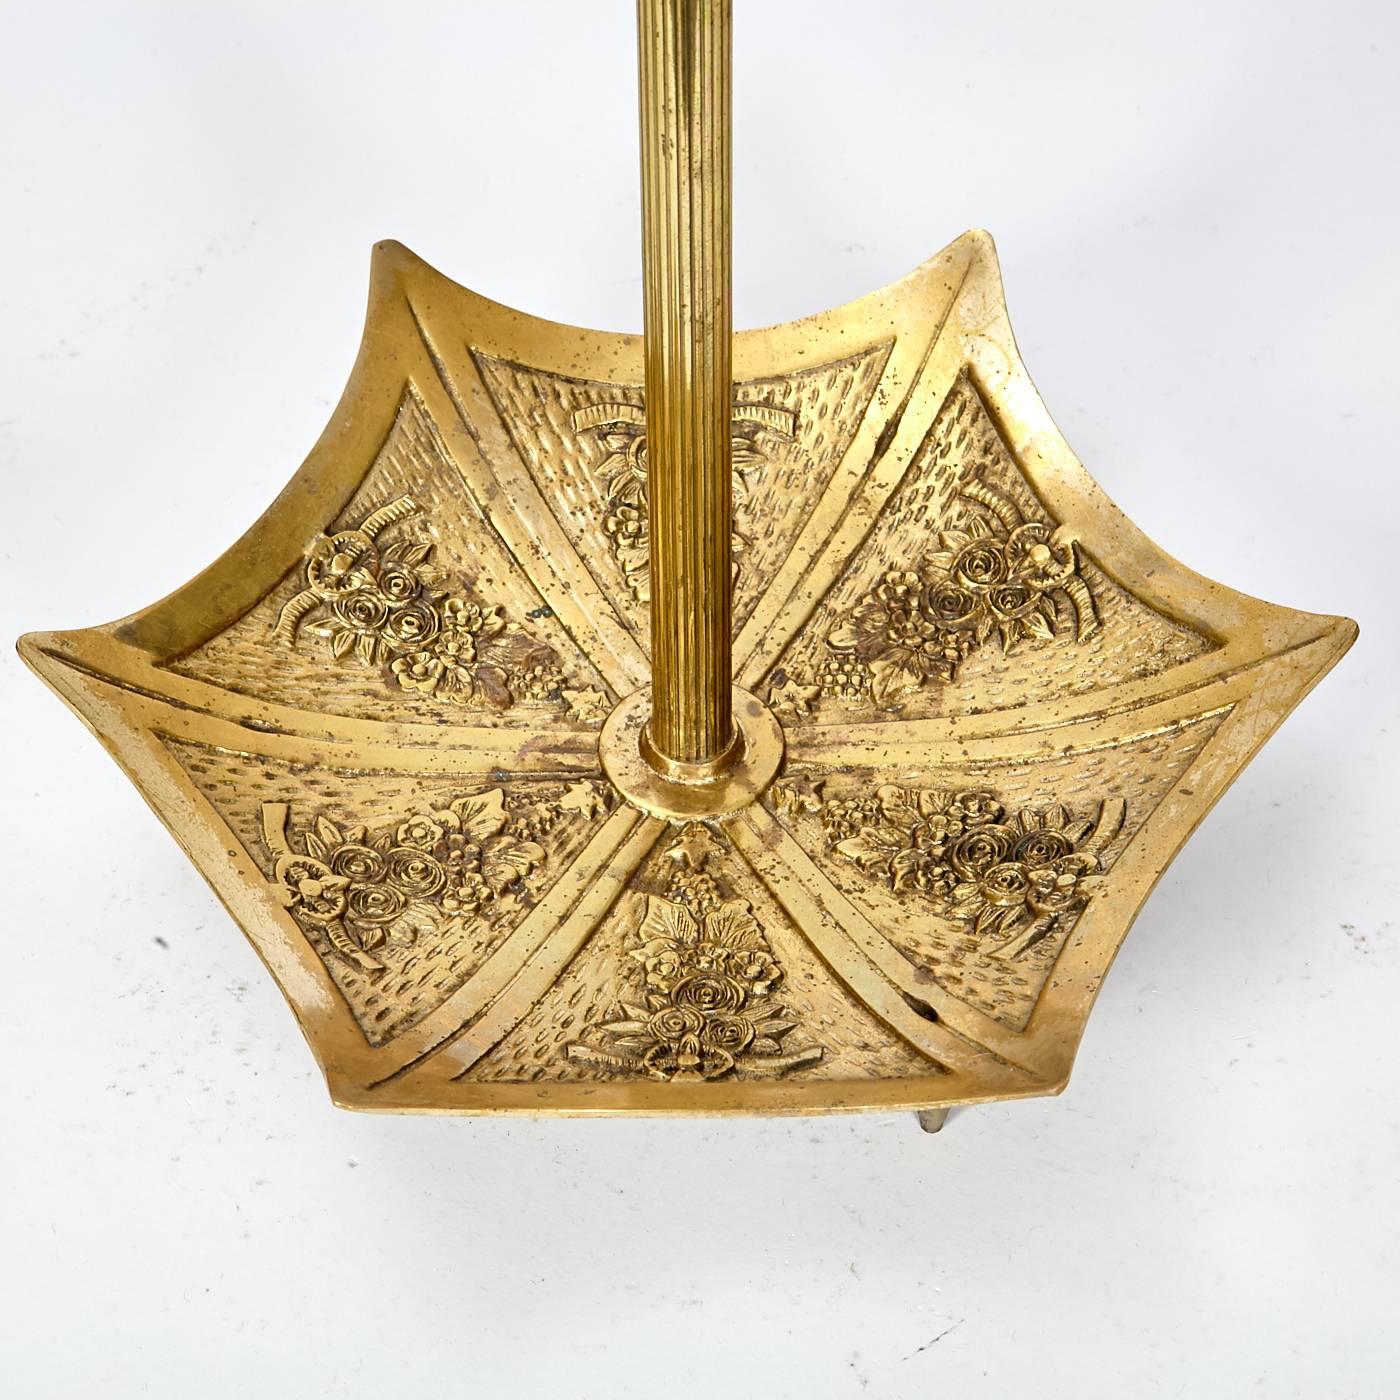 Art Deco style gilt metal umbrella stand with floral and dragon handled accents. Holds five umbrellas and walking sticks. Light wear to base. No maker's mark.